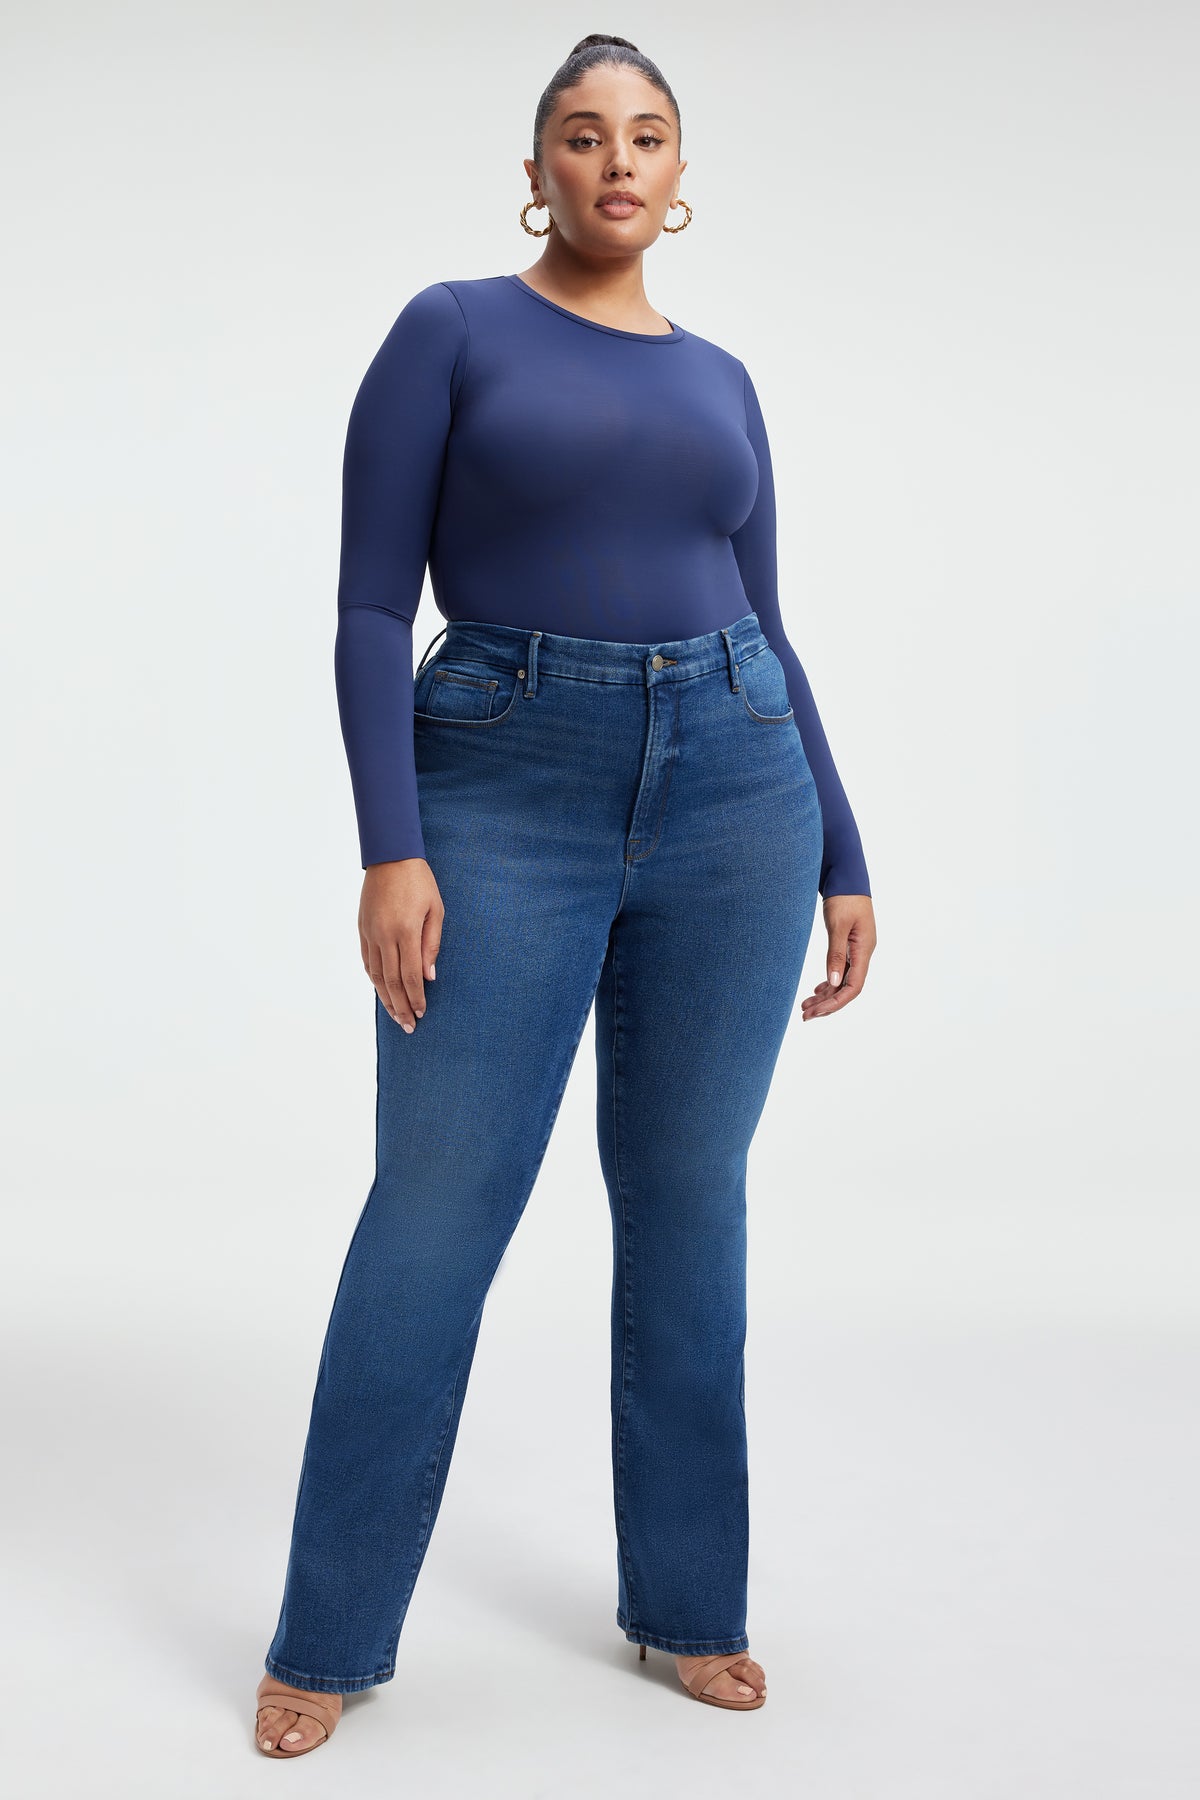 High waist jeans that will sculpt your curves beautifully